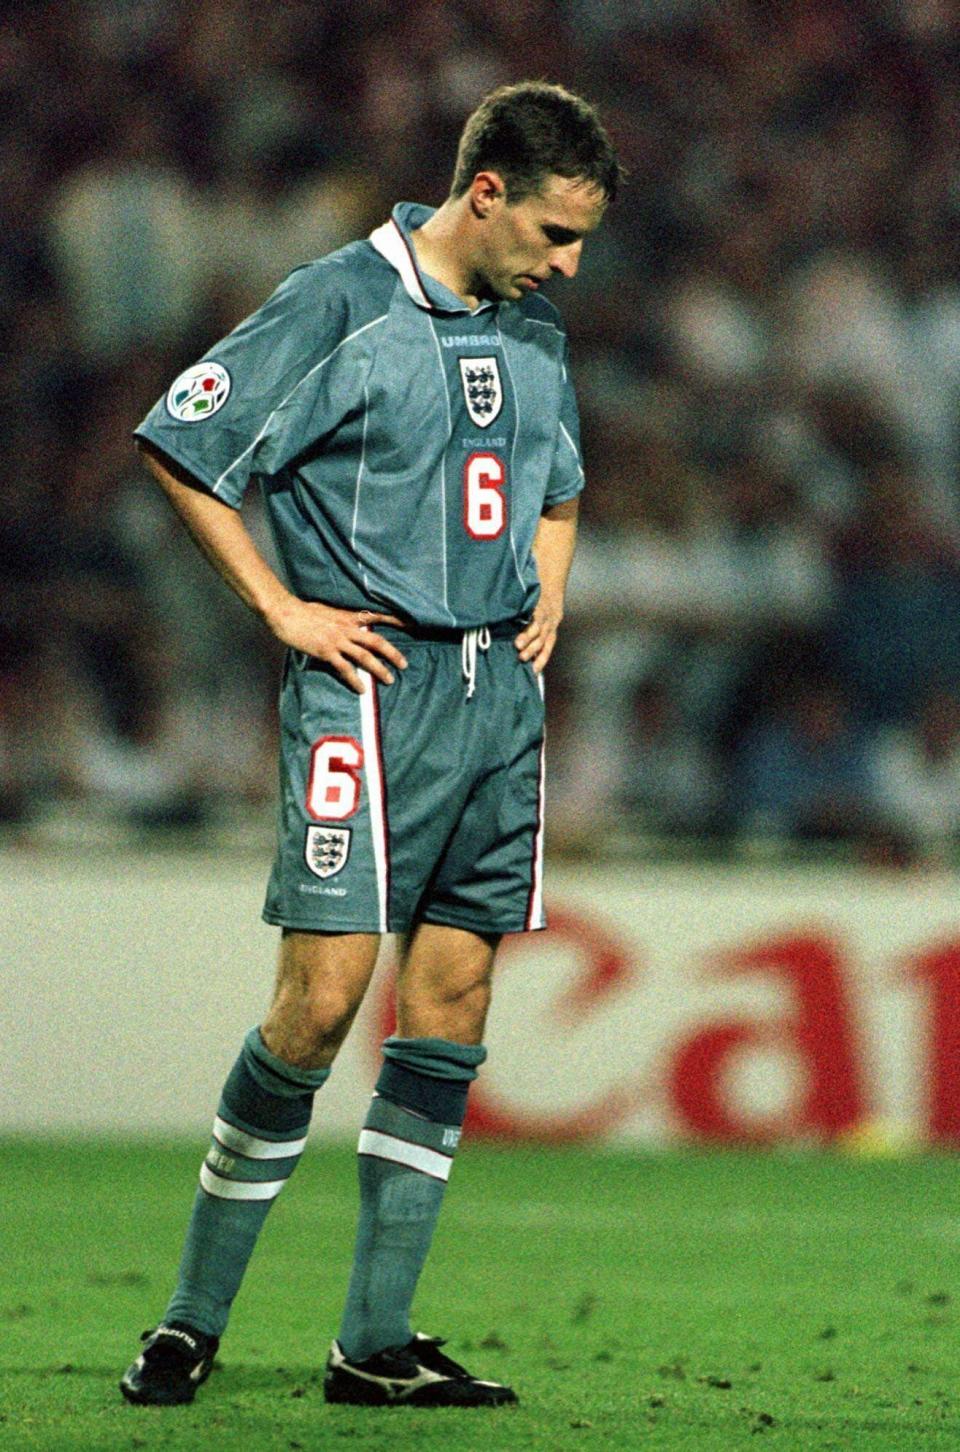 FILE - In this June 26, 1996 file photo England's Gareth Southgate bows his head after missing from the spot during a penalty shootout in the European Soccer Championships semi-final match against England at London's Wembley Stadium. Germany won 6-5 on penalties after the match finished 1-1 following extra time. Current England coach Gareth Southgate missed the decisive kick in the shootout, and Germany went on to win the title. (AP Photo/Lynne Sladky, File)